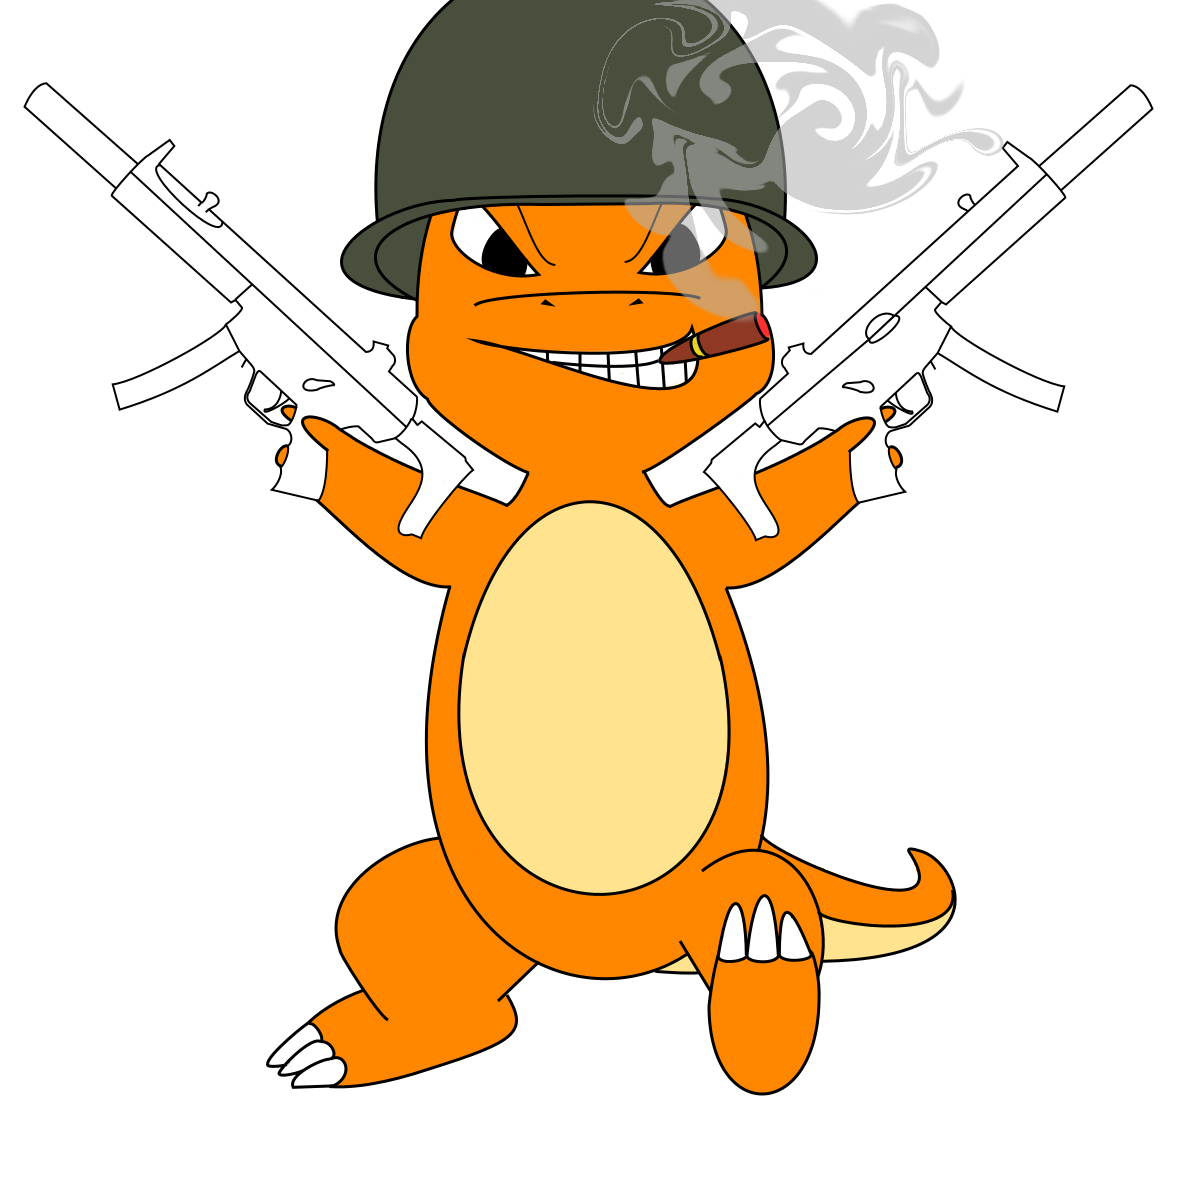 Making that 'Army' Charmander Day #2